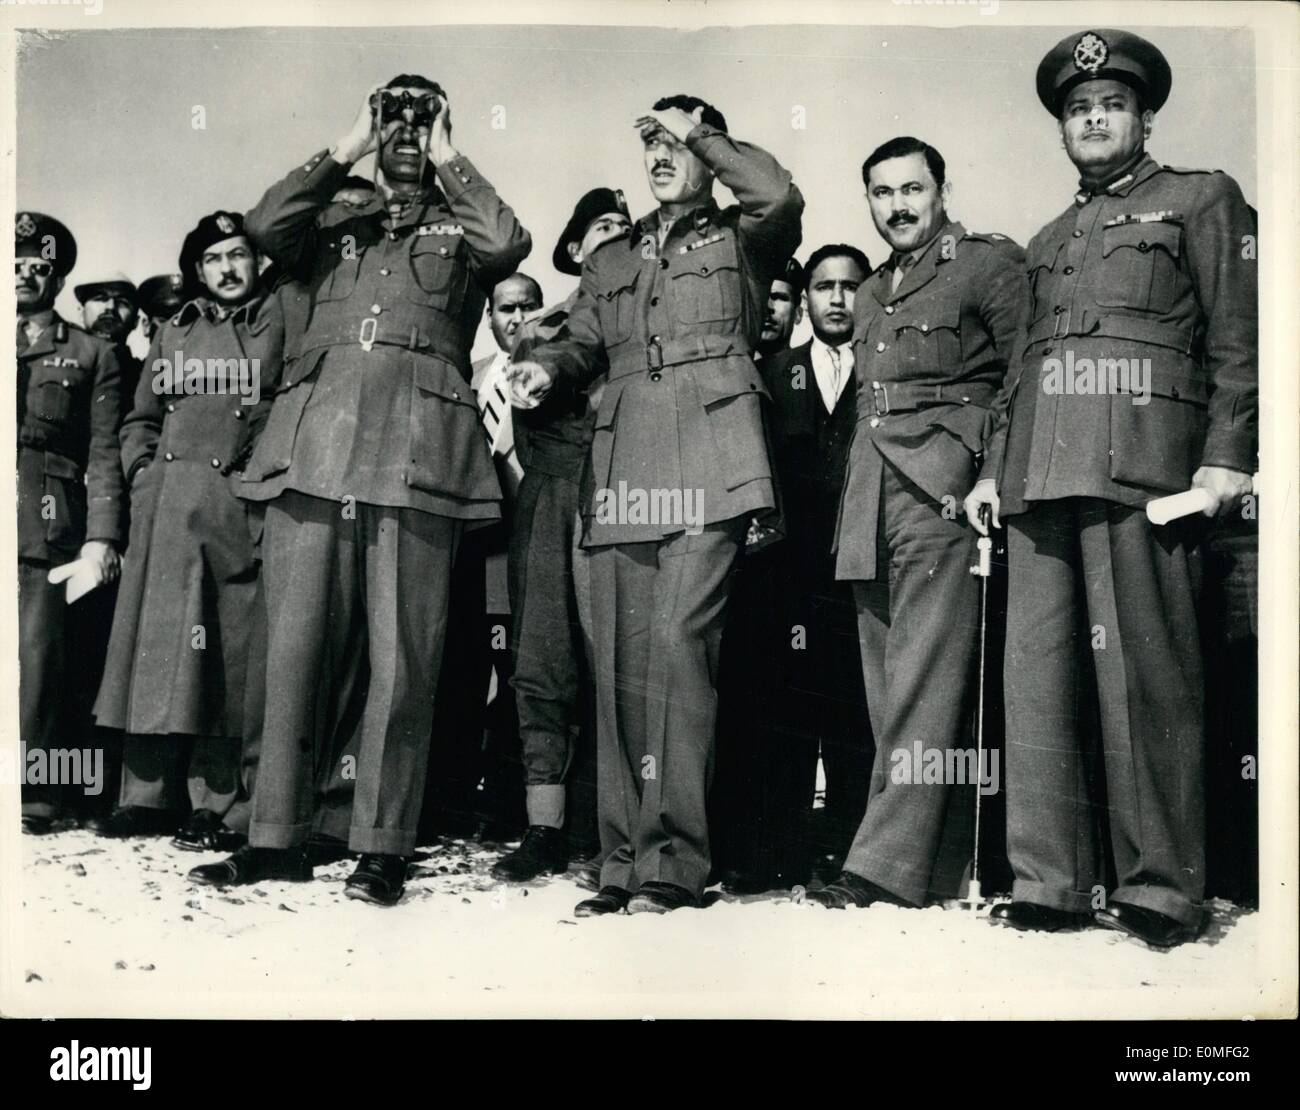 Dec. 12, 1954 - Prime Minister of Egypt attends Desert Manoeuvres. Nasser uses field glasses.: Prime Minister Gamal Abdul Nasser and several members of the Revolutionary Command Council attended the annual Armed Forces Manoeuvres in the desert west of Cairo. Photo shows: P.M. Nasser, members of the Revolutionary Council and Cabinet Ministers seen as they watch the manoeuvres. Stock Photo